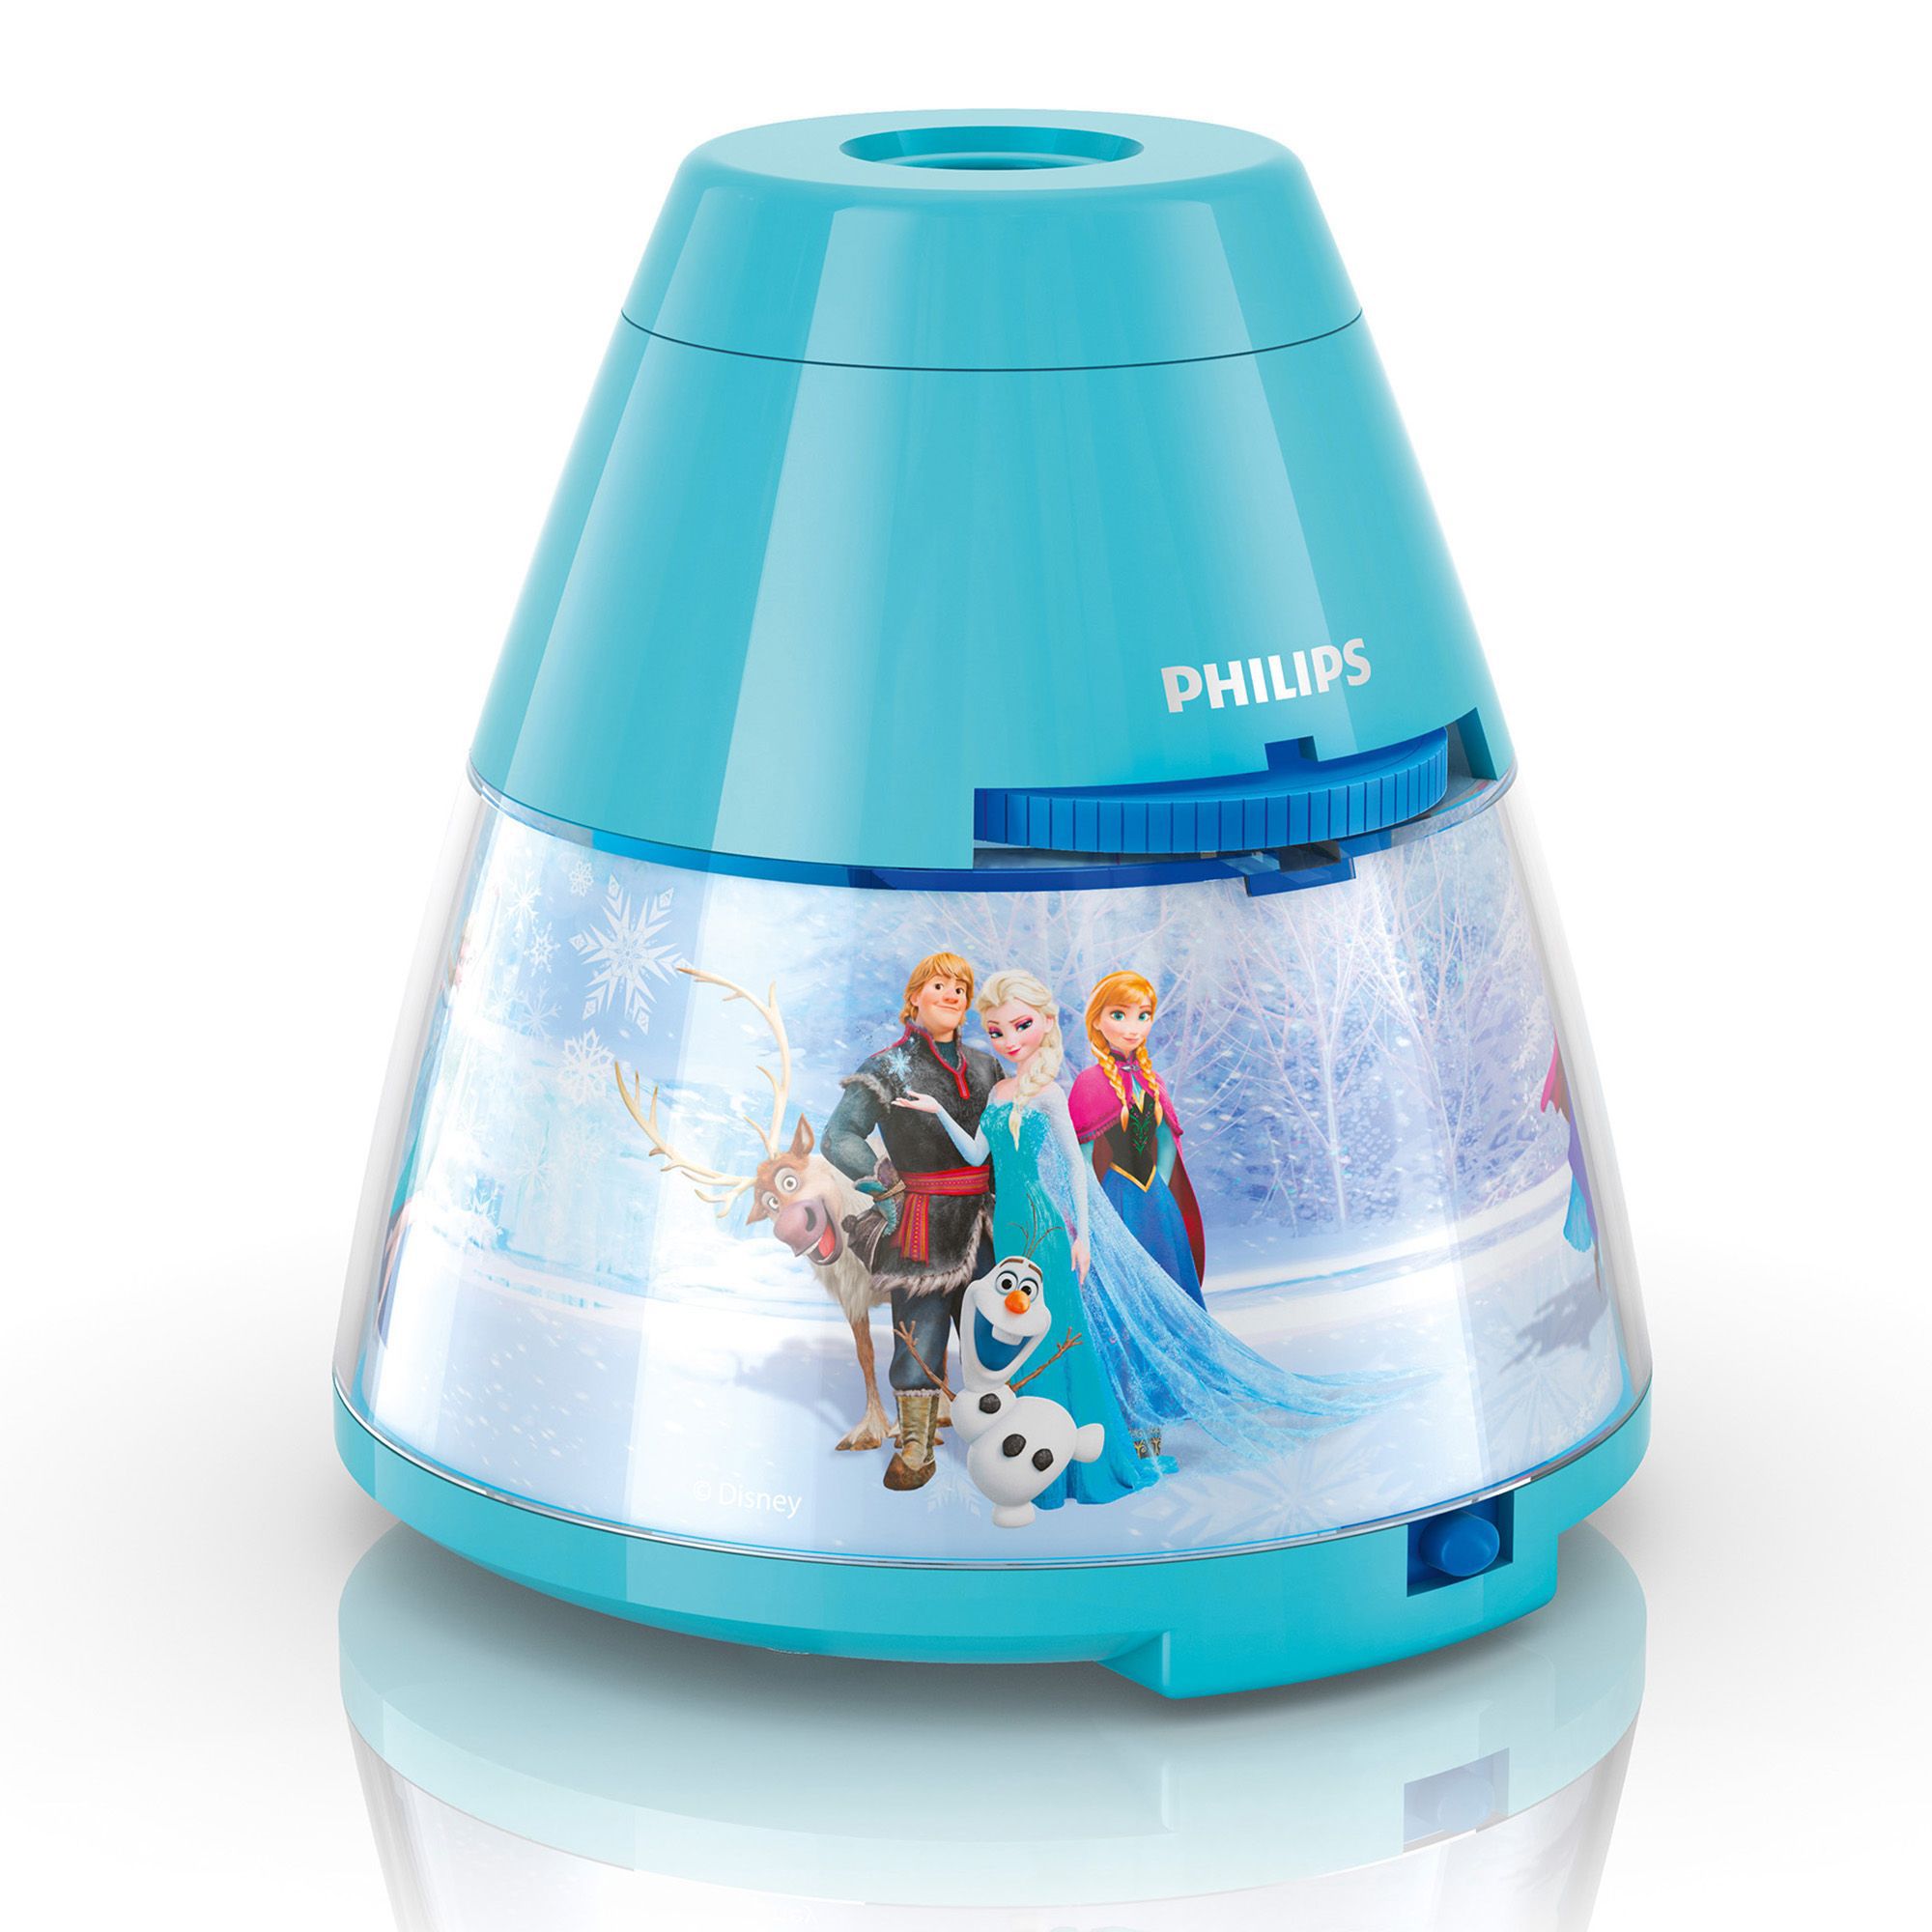 Philips Blue Projector lamp